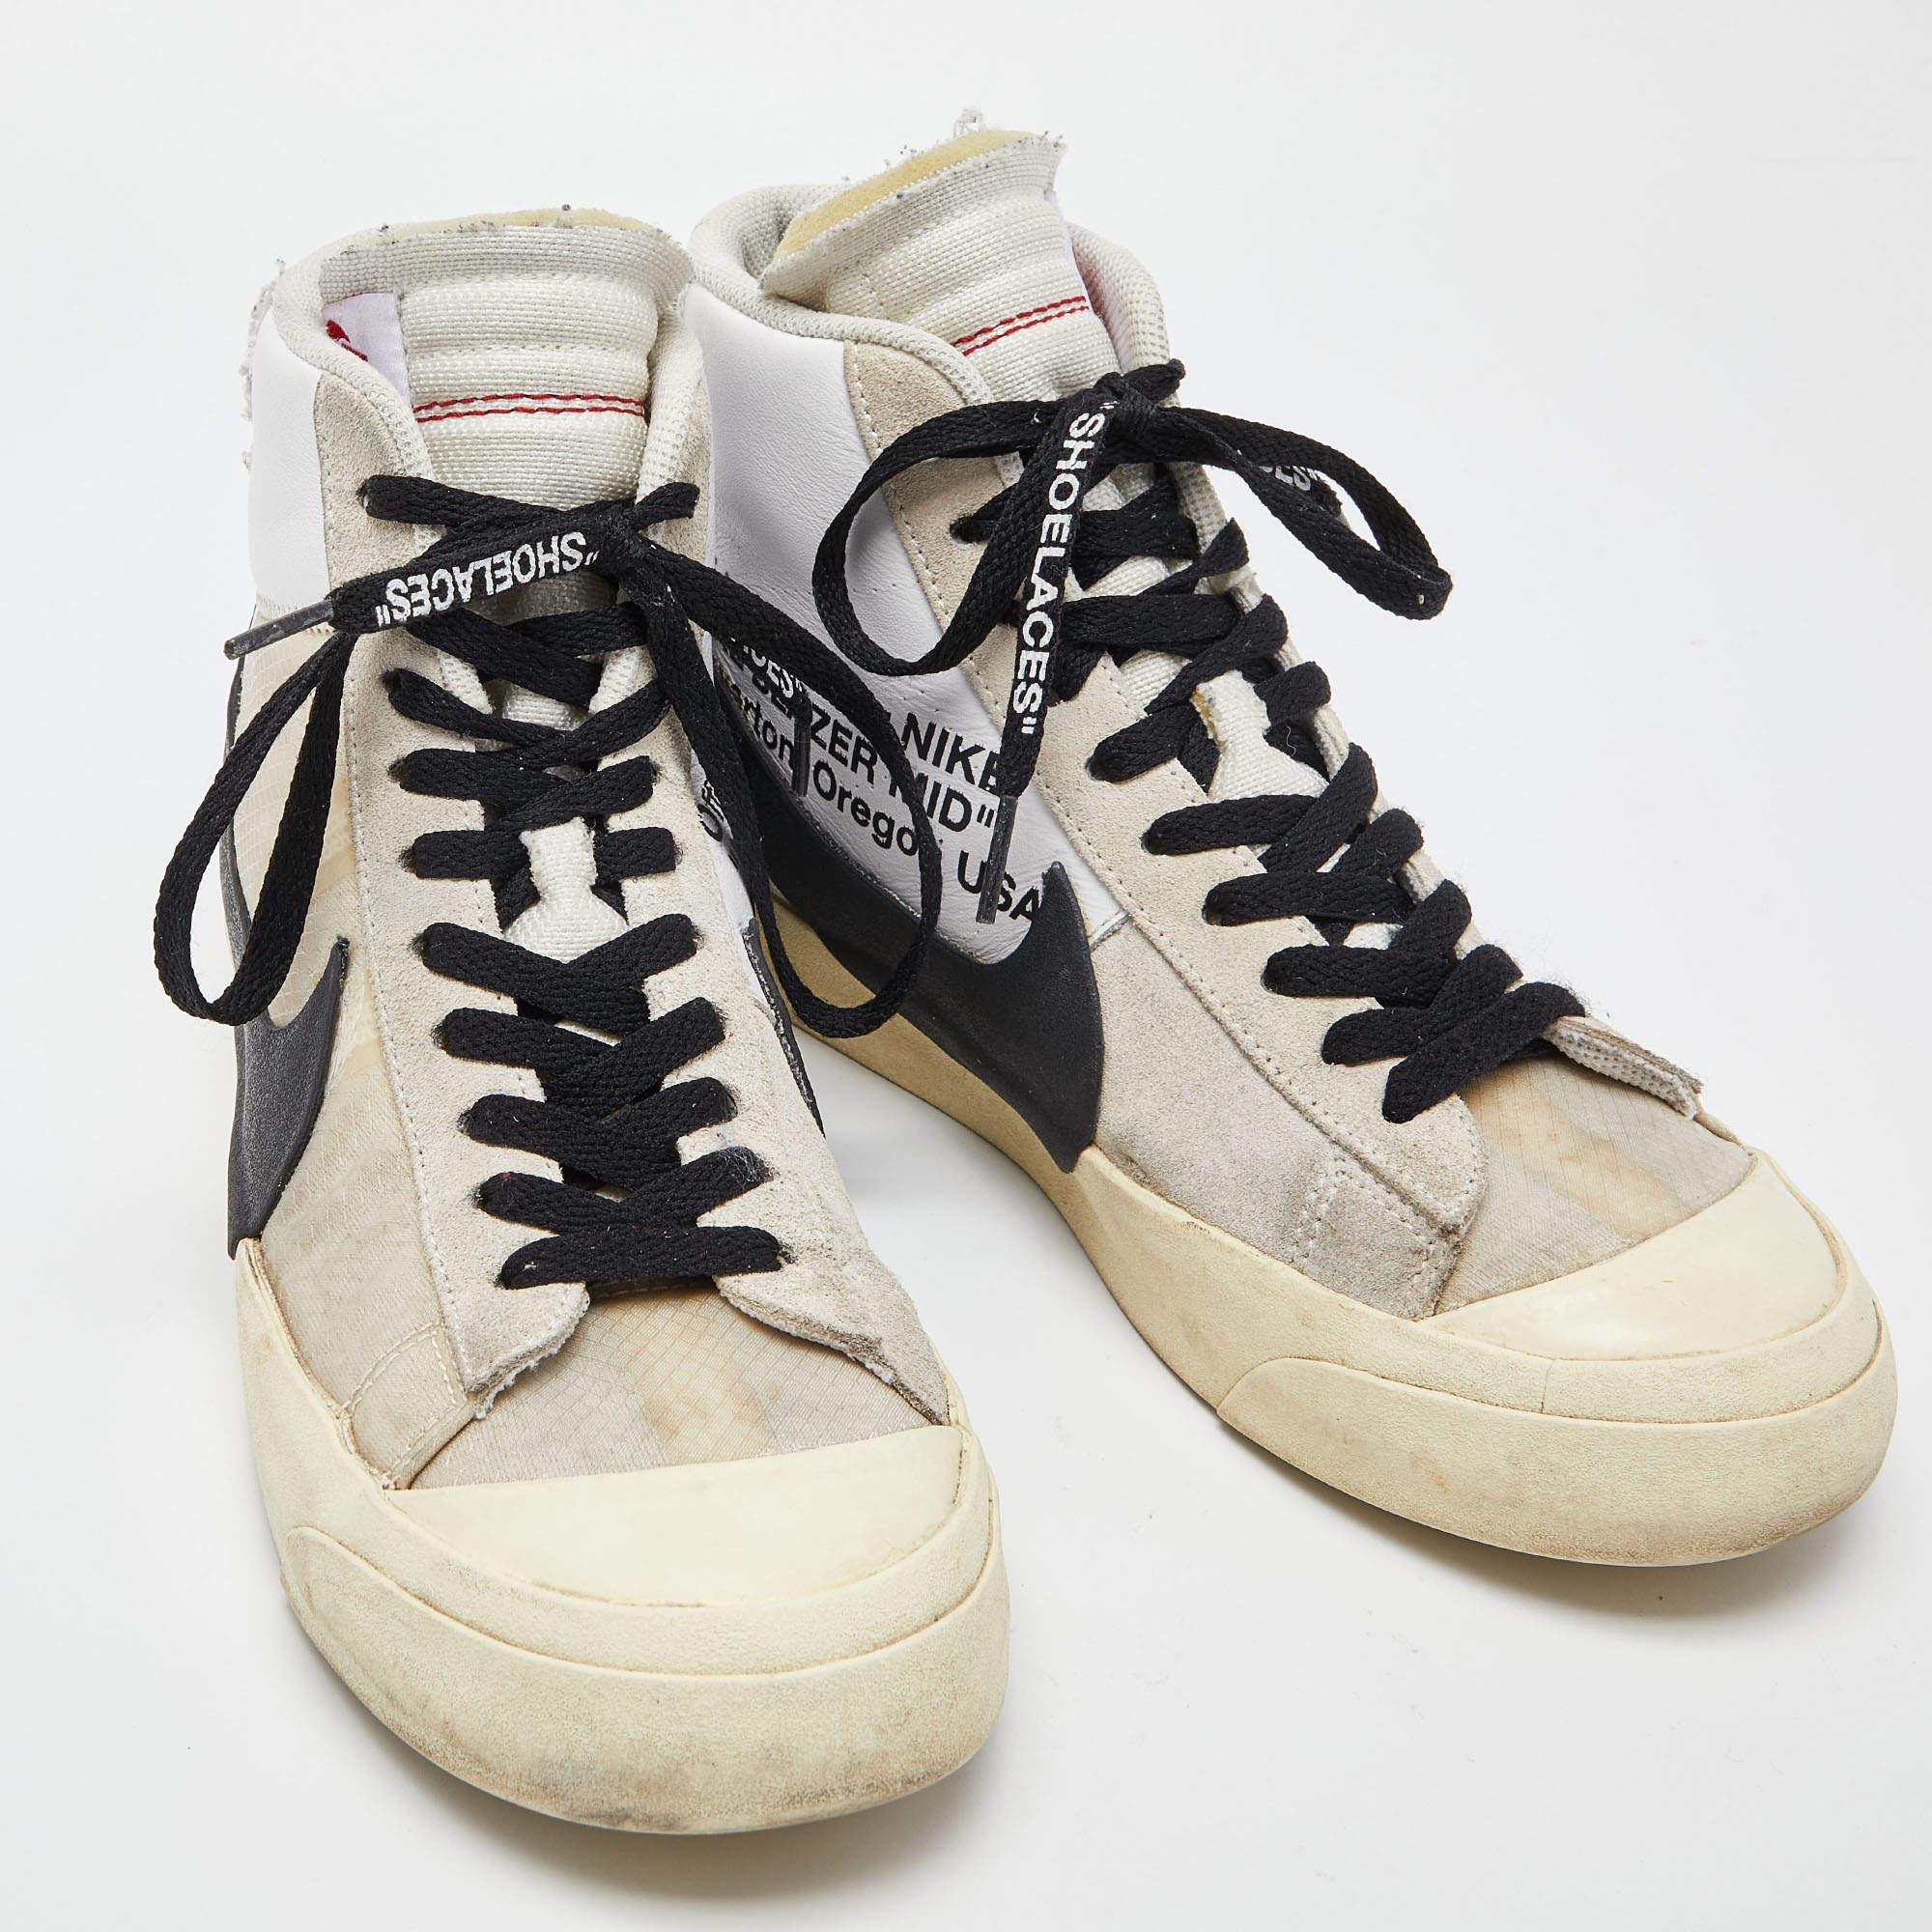 Off-White x Nike Suede, Mesh and Leather Mid Blazer Lace Up Sneakers Size 41 1